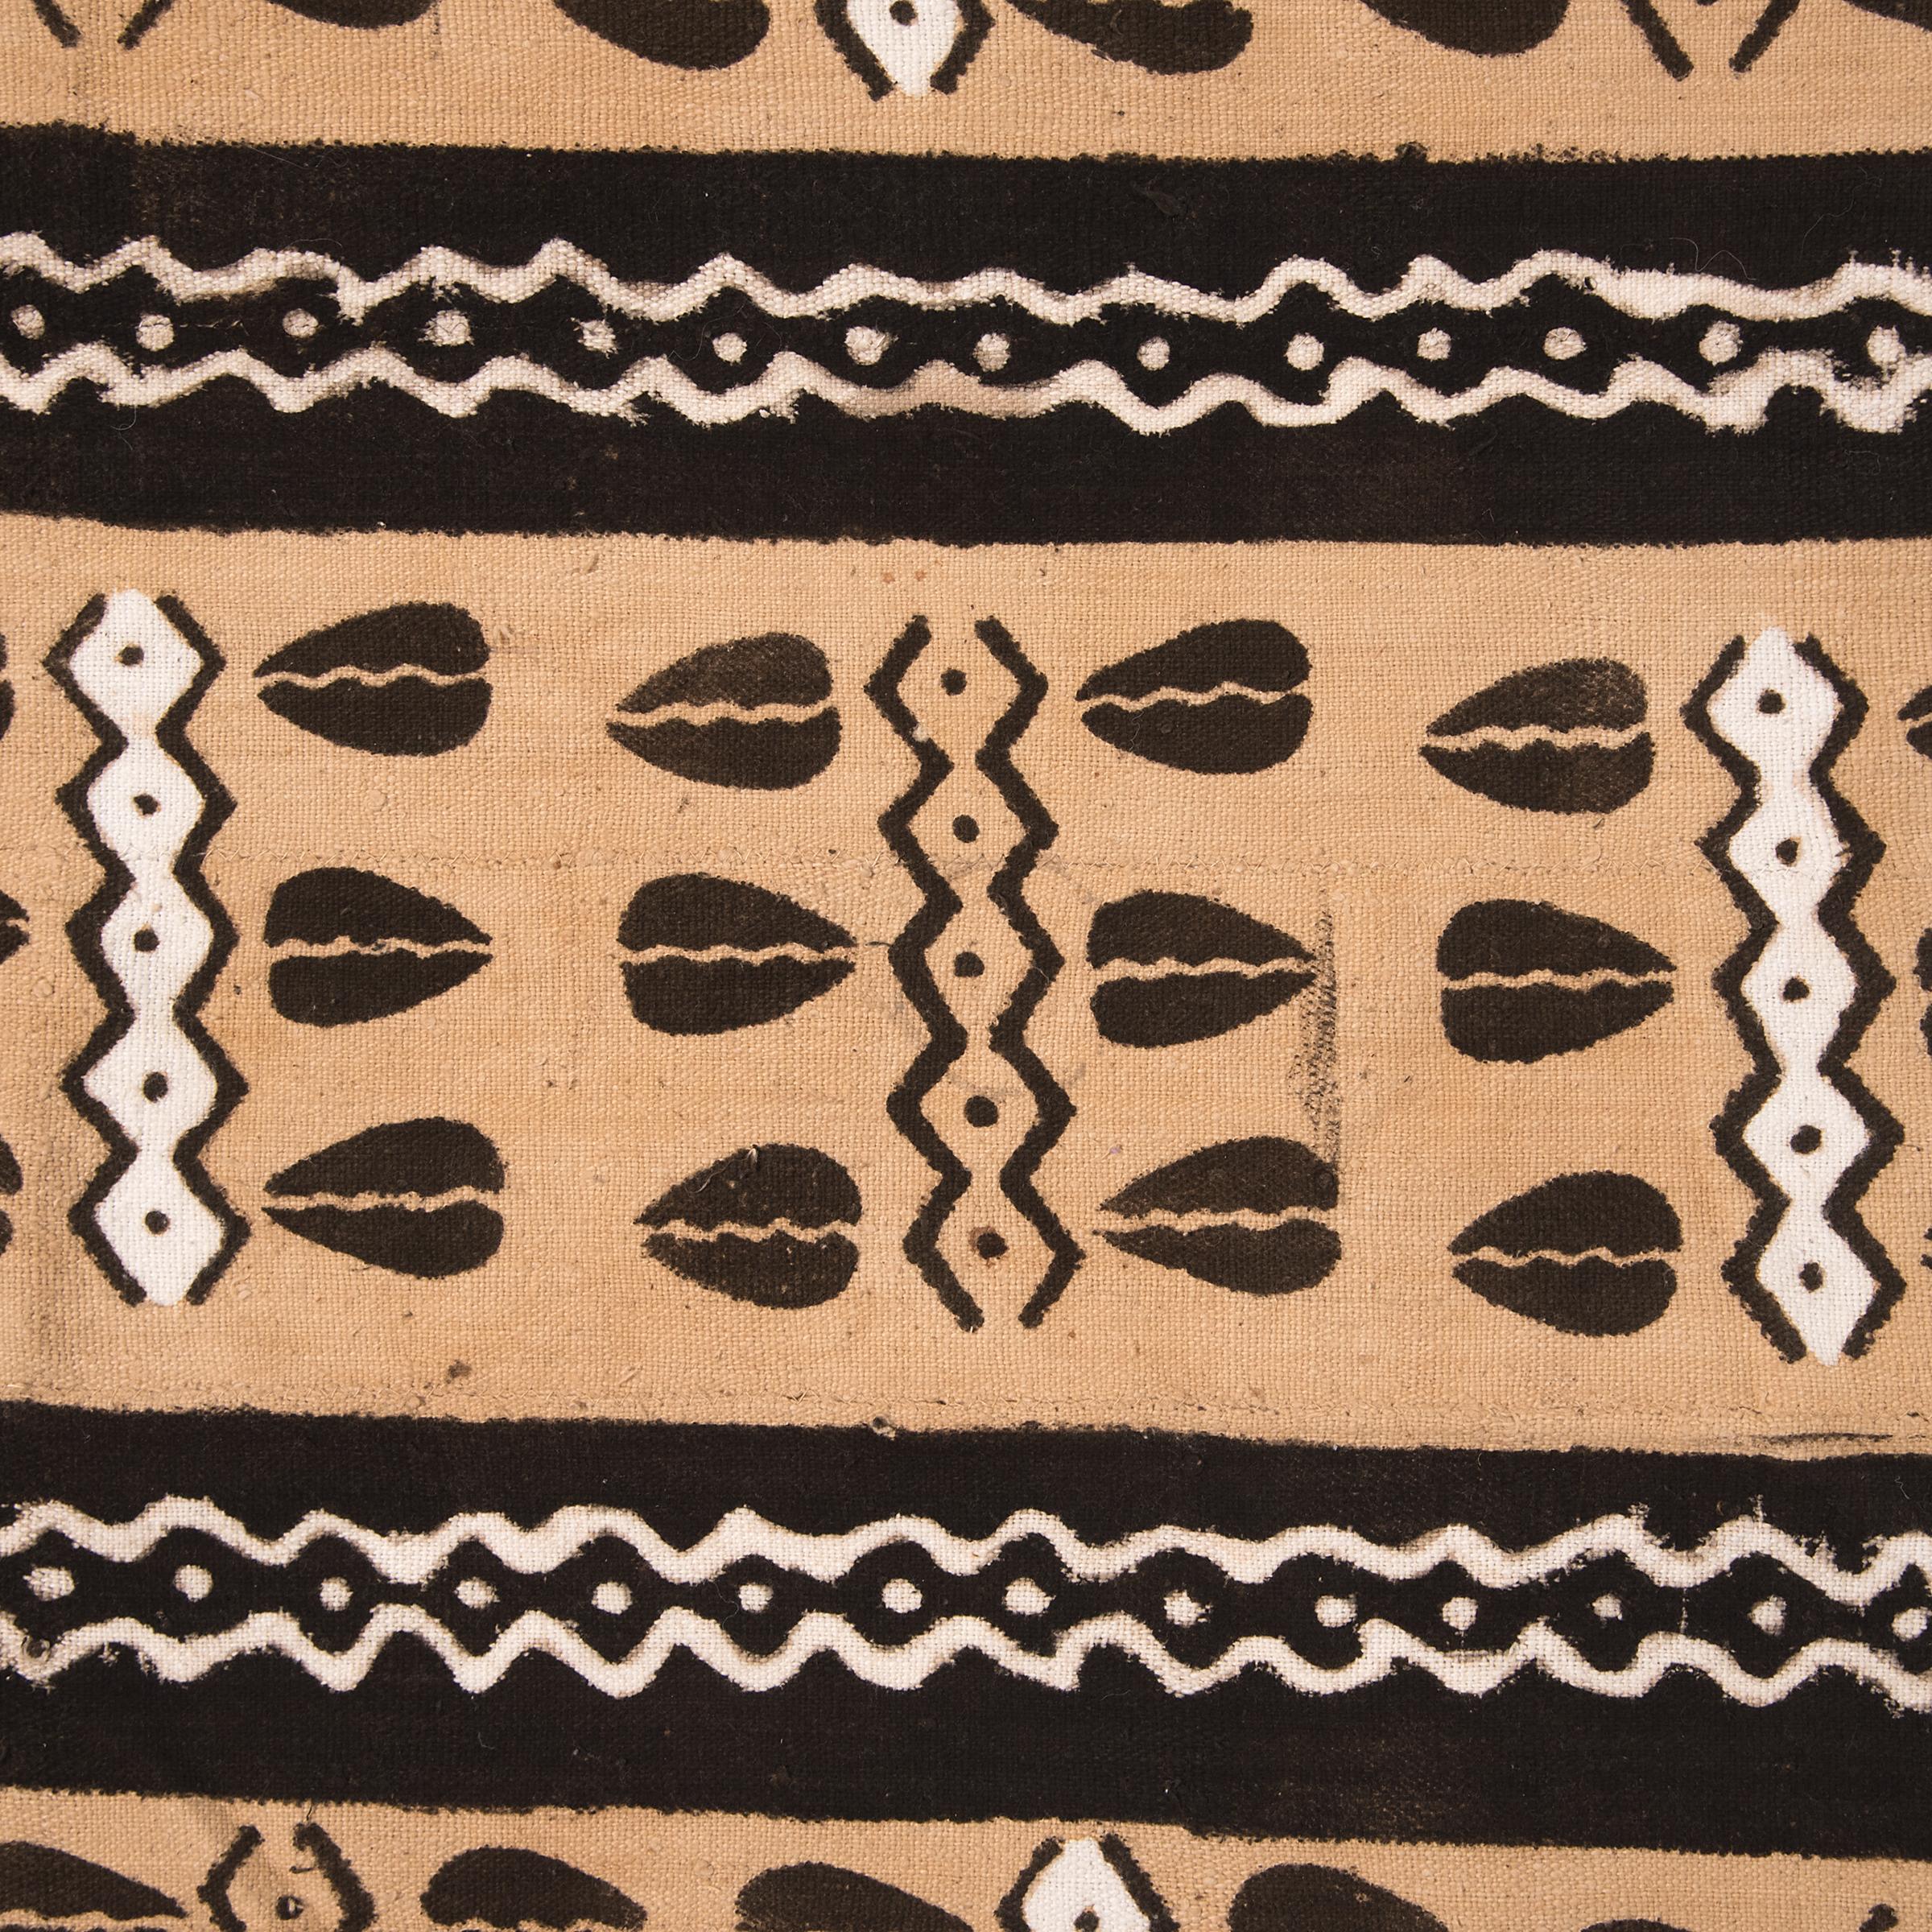 Commonly known as Bogolan or Bògòlanfini, this cotton textile was hand spun, handwoven, then dyed through a technique that has been passed down in the Bamana region of Mali for centuries. In traditional Malian culture, Bogolan, or mudcloth, is worn